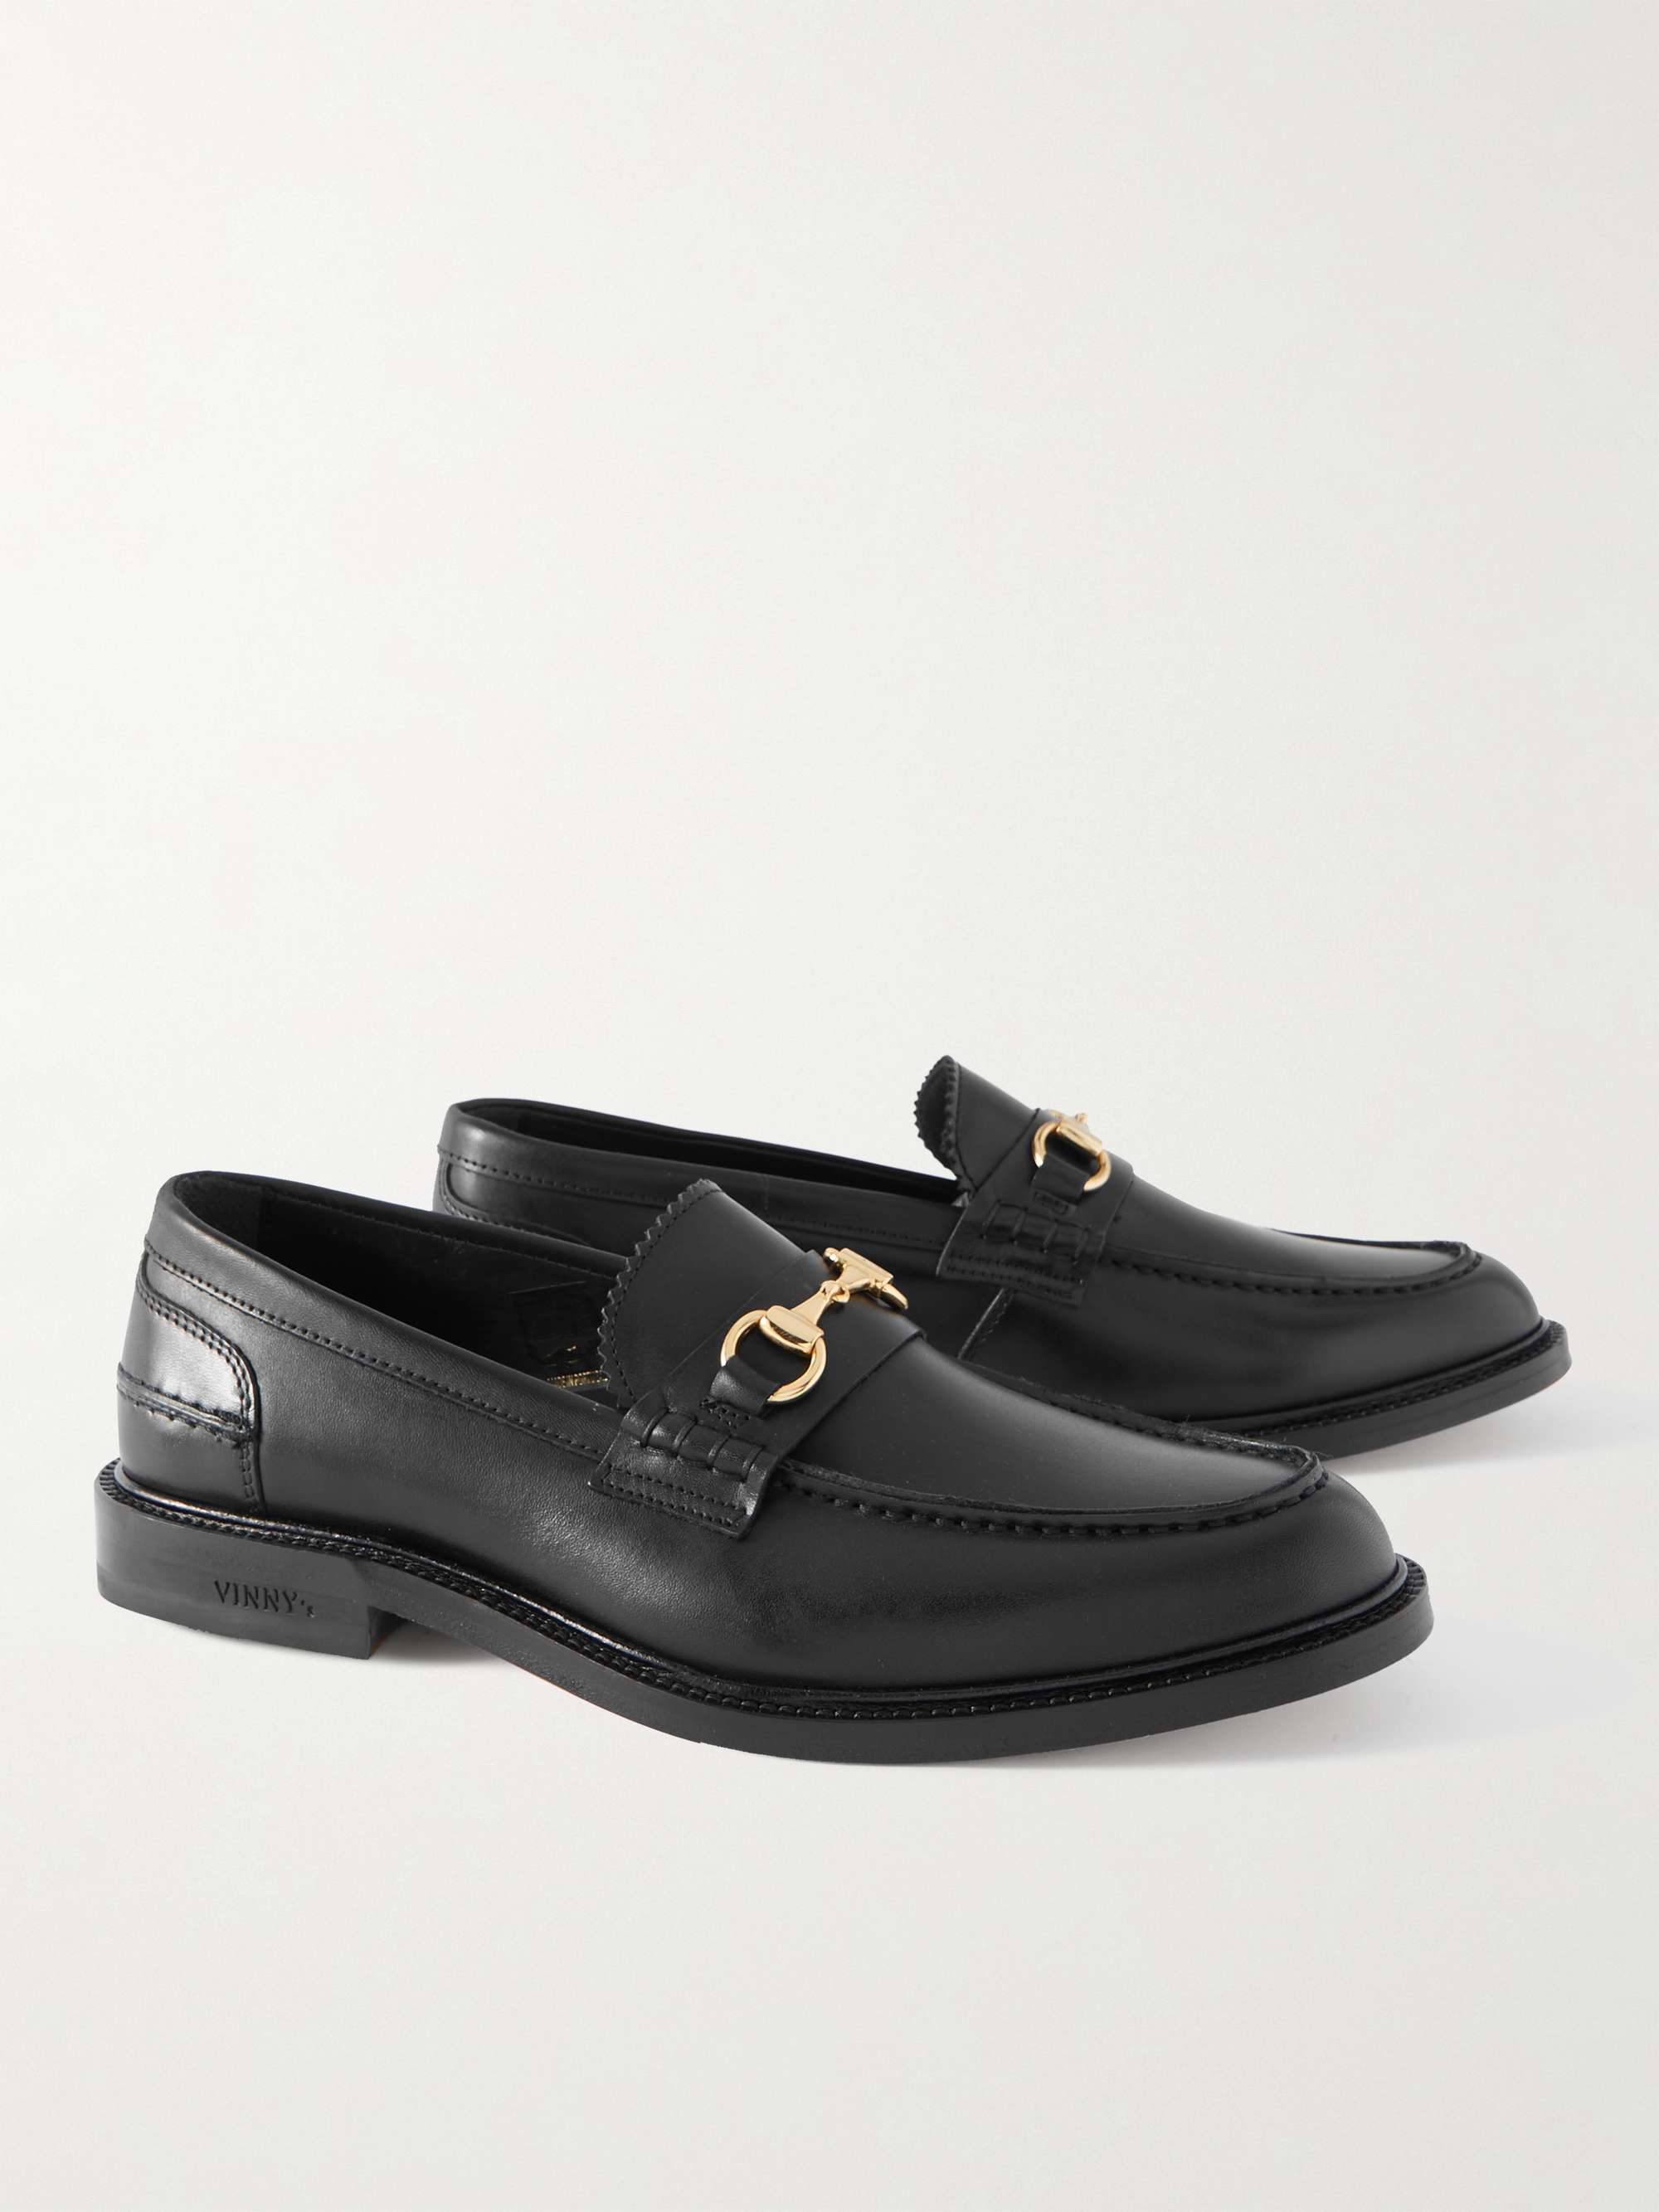 VINNY'S Townee Leather Loafers